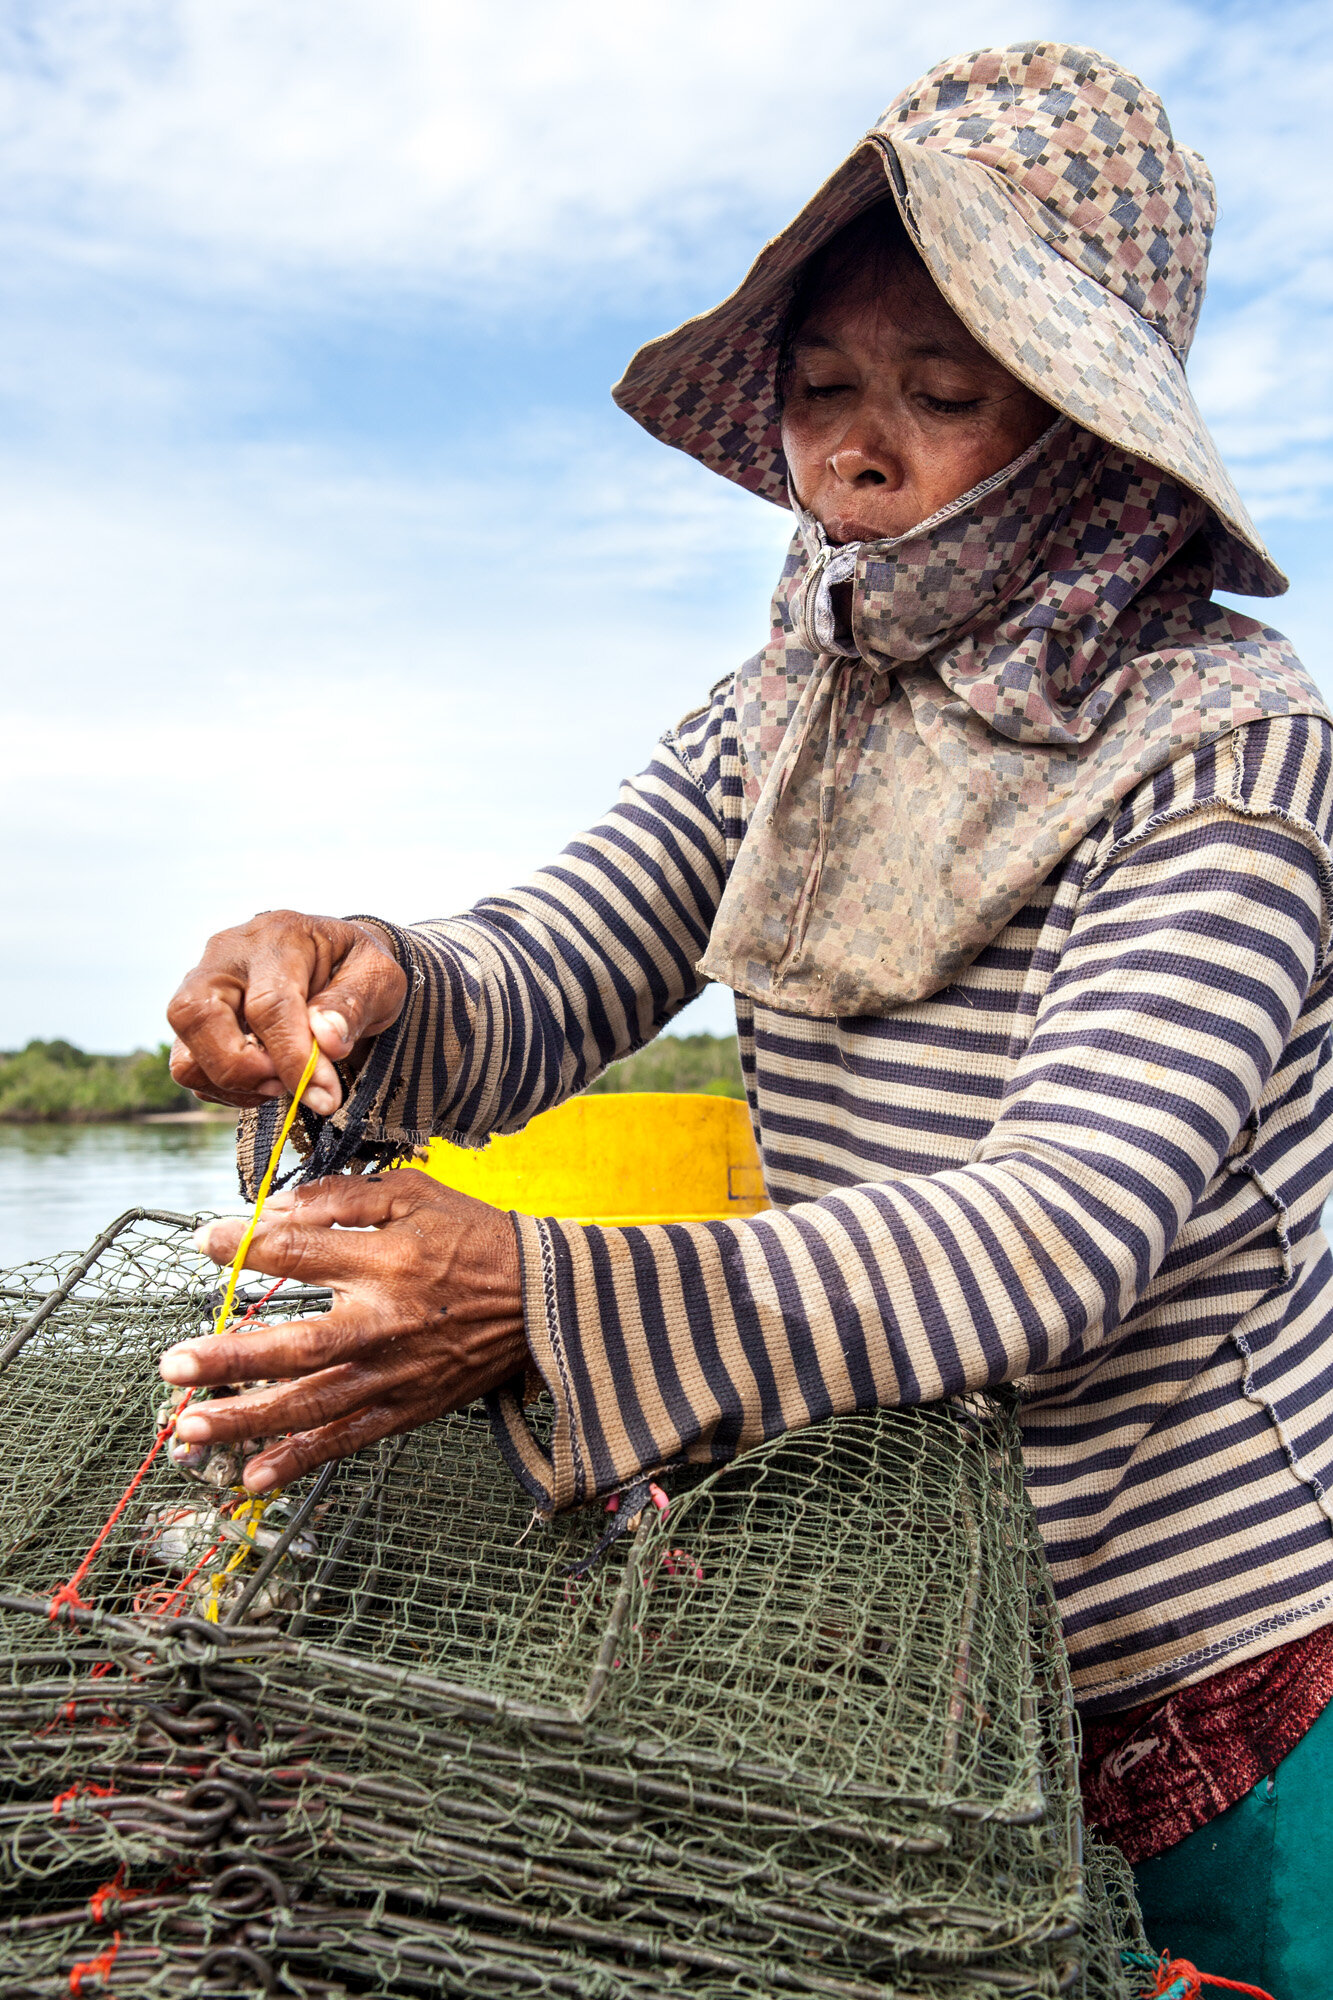  Baiting crab traps, 54 year old widow Hie Nary says her catch is a bare fraction of what it used to be. She and her husband had gone into debt to buy the boat and equipment, and now she is considering relocating to work as a garment worker.  